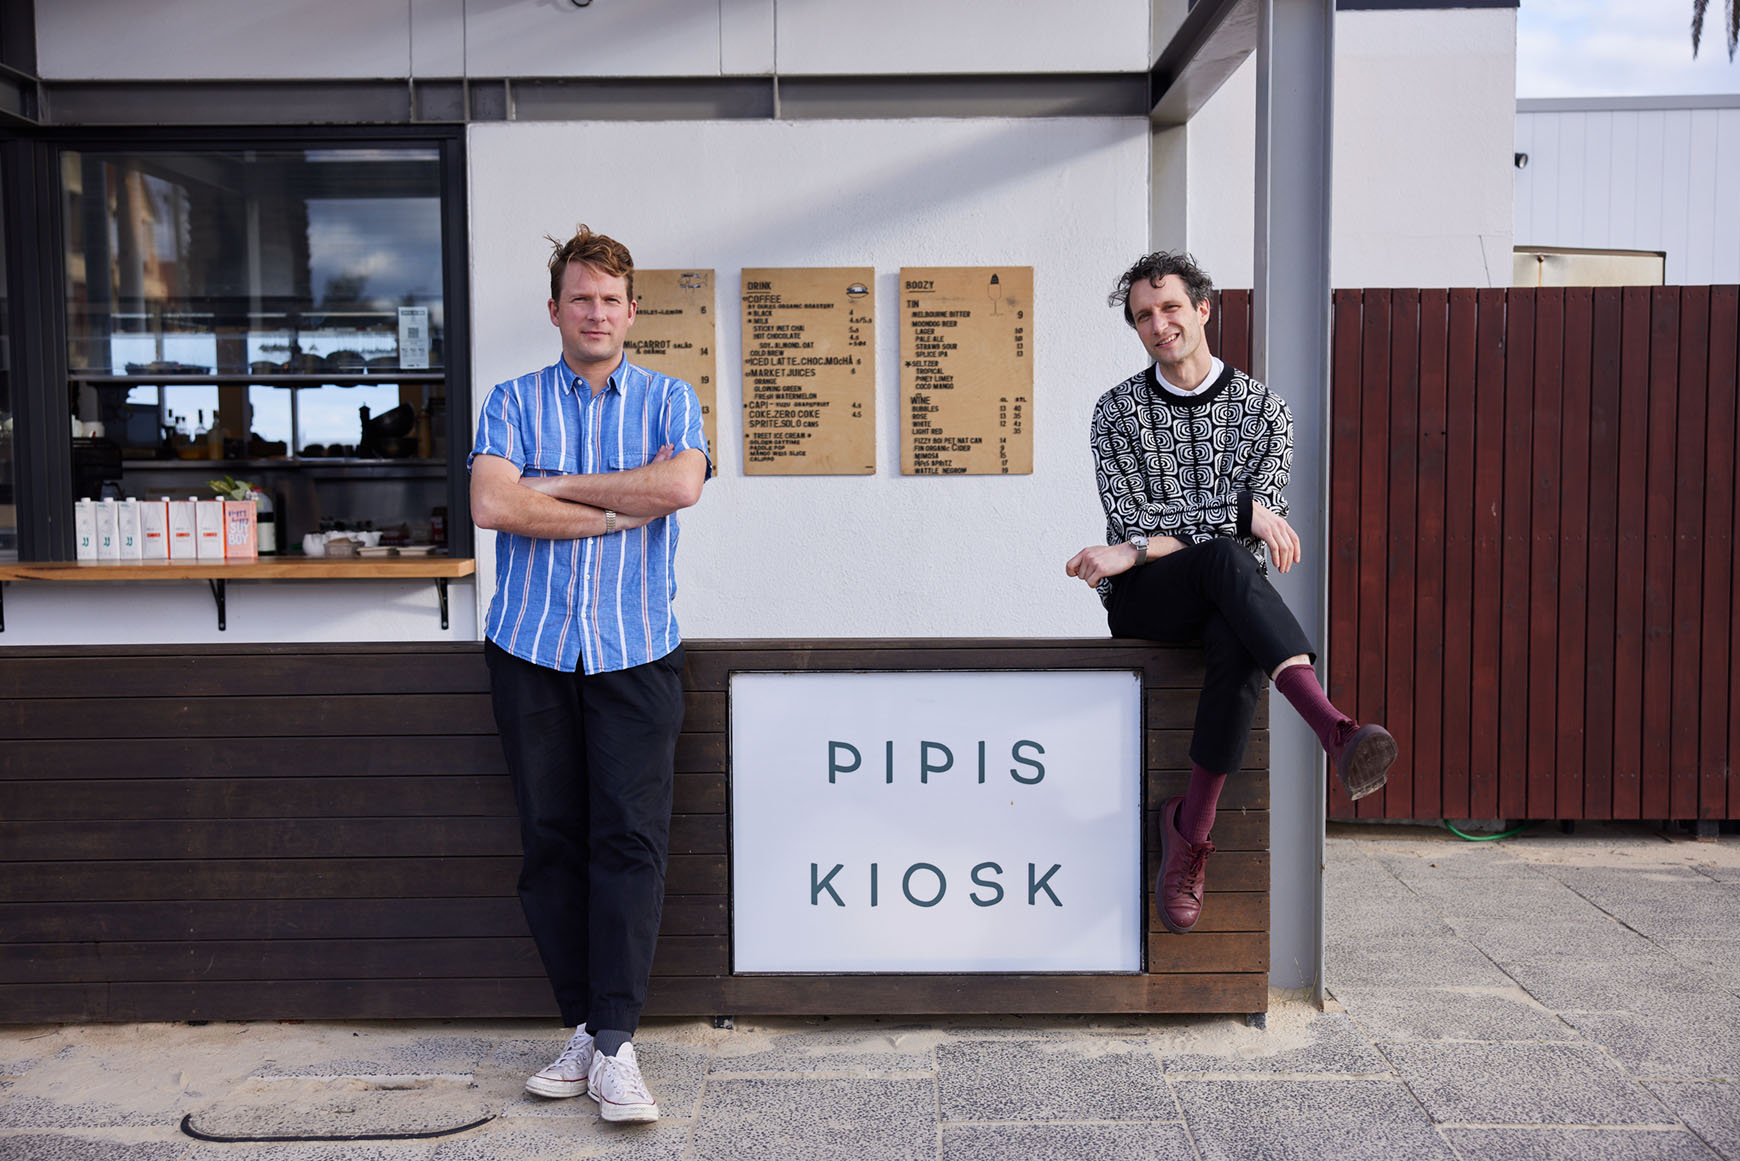 Owners Jordan and Tom of Pipis Kiosk stand next to signage designed by Small and Co